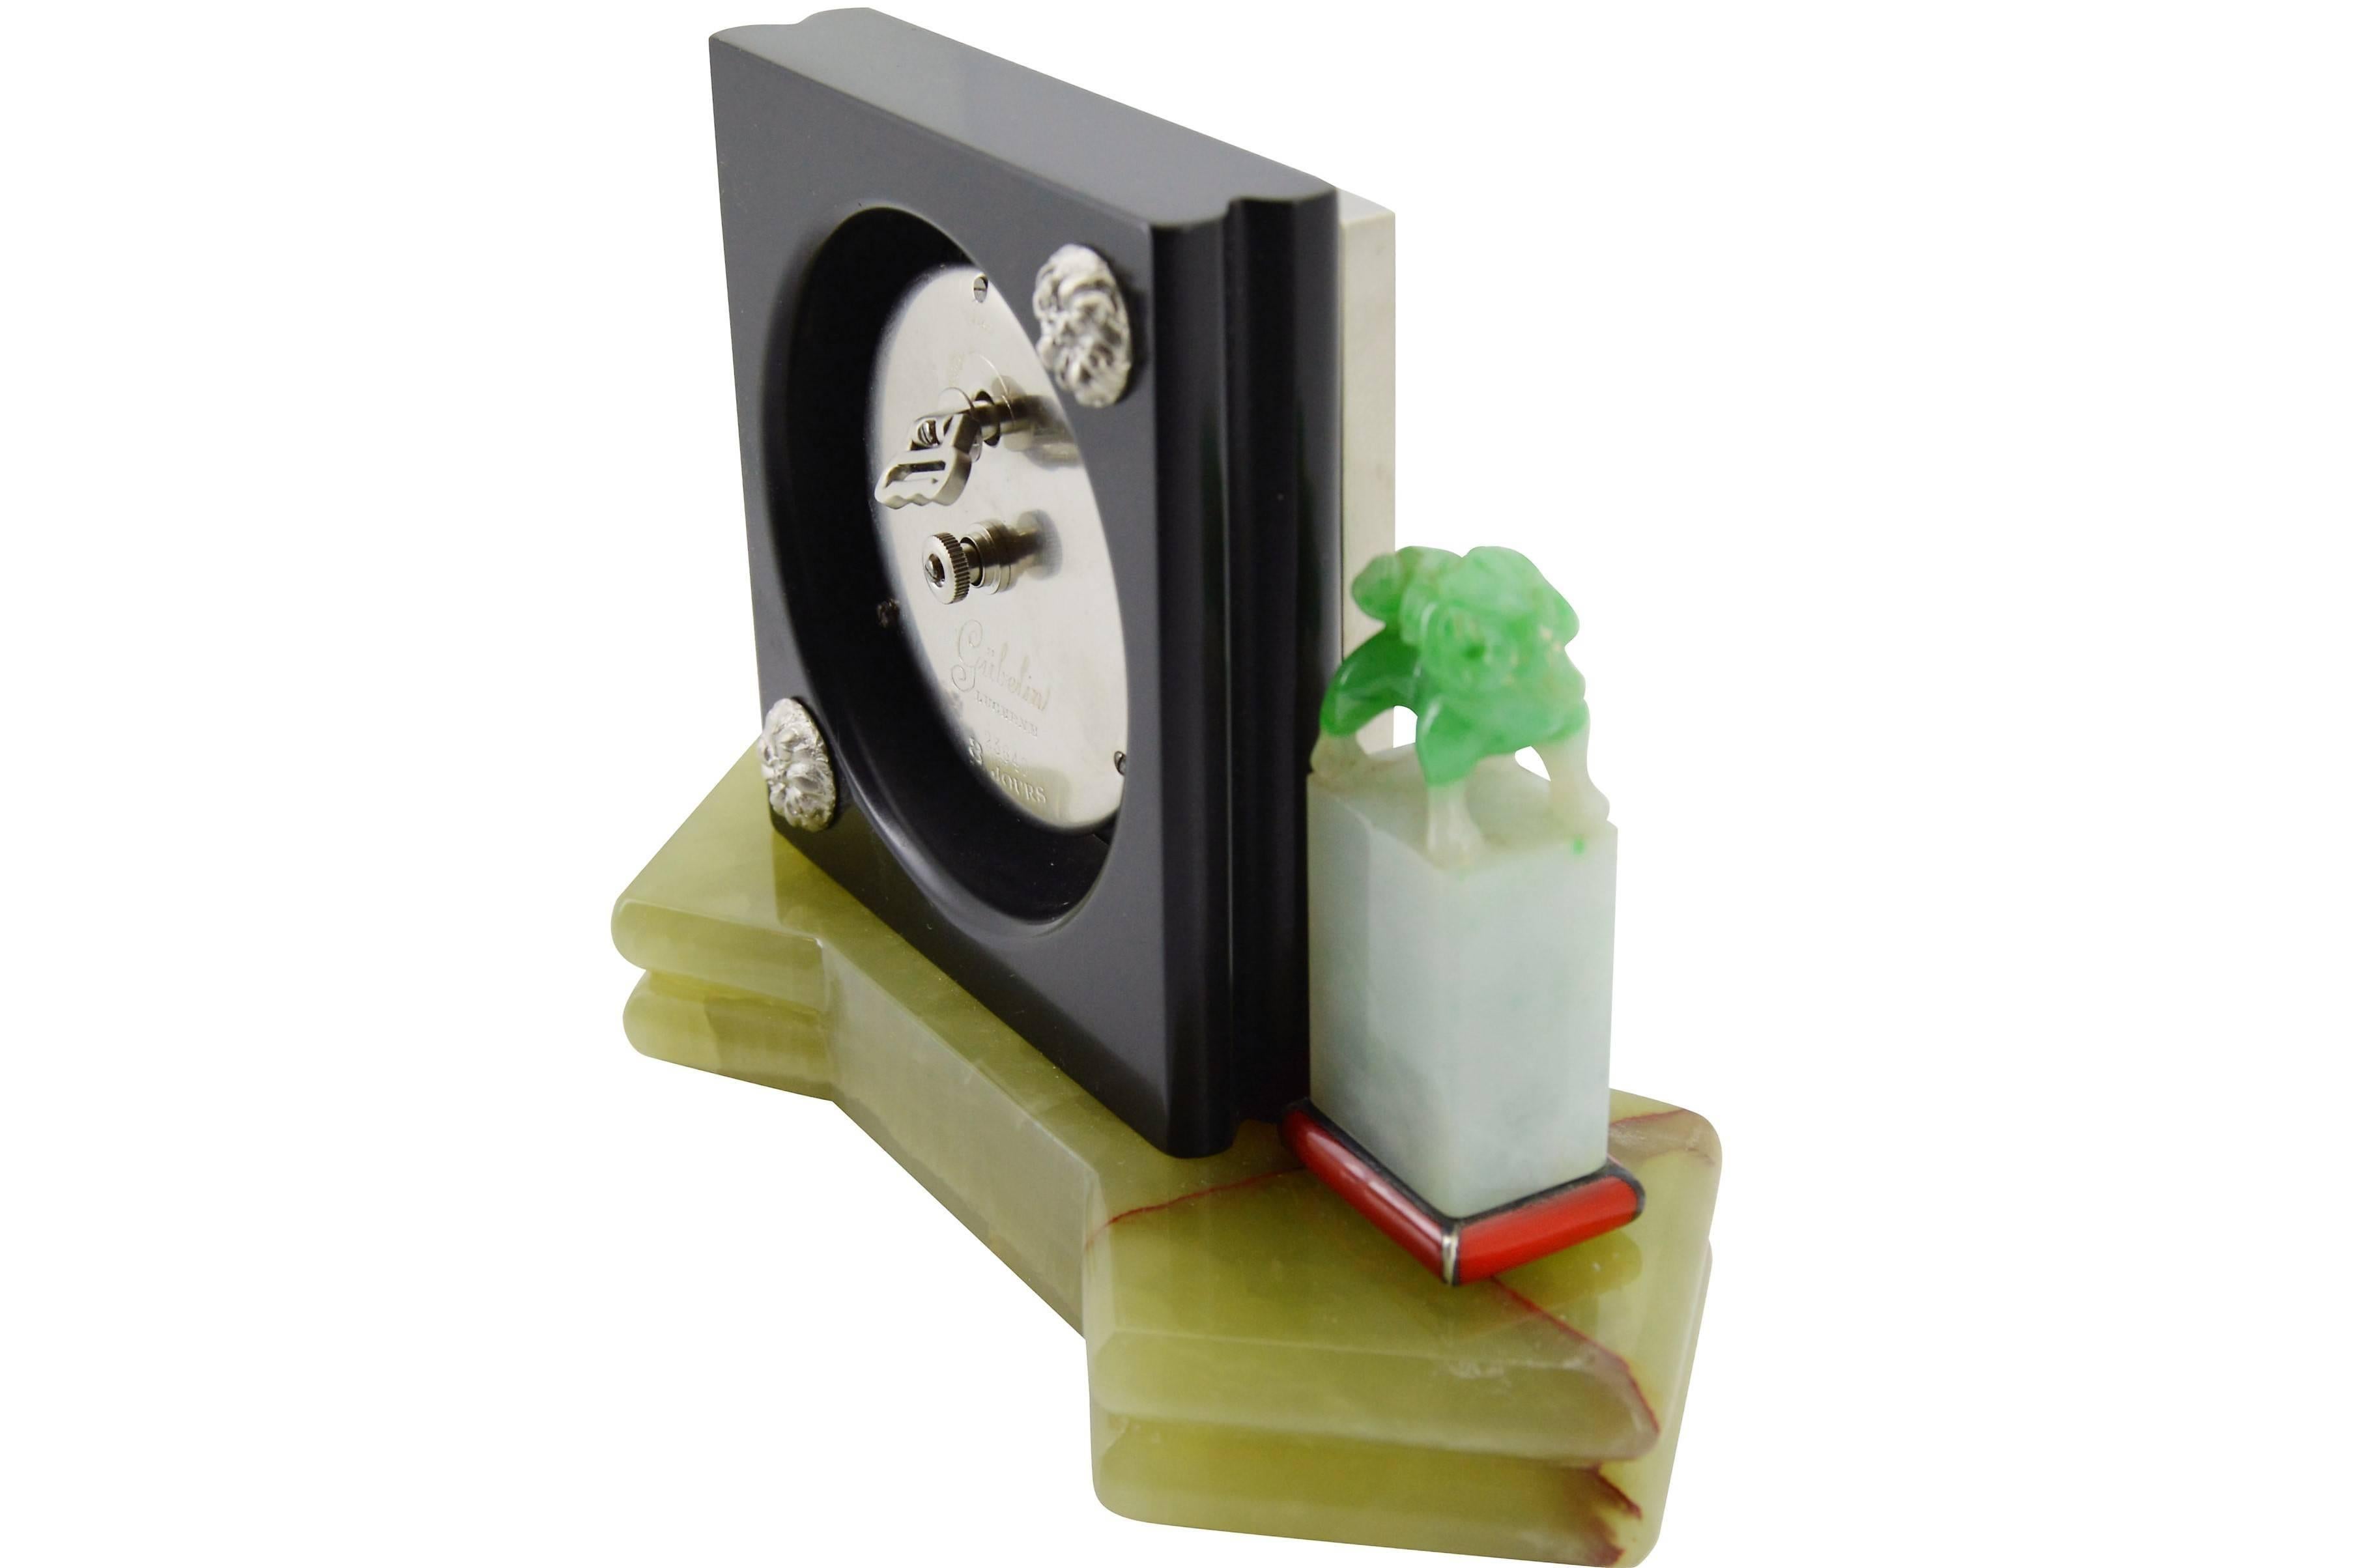 1930s E. Gubelin Art Deco Desk Clock in the Asian Chinese Style (Art déco) im Angebot